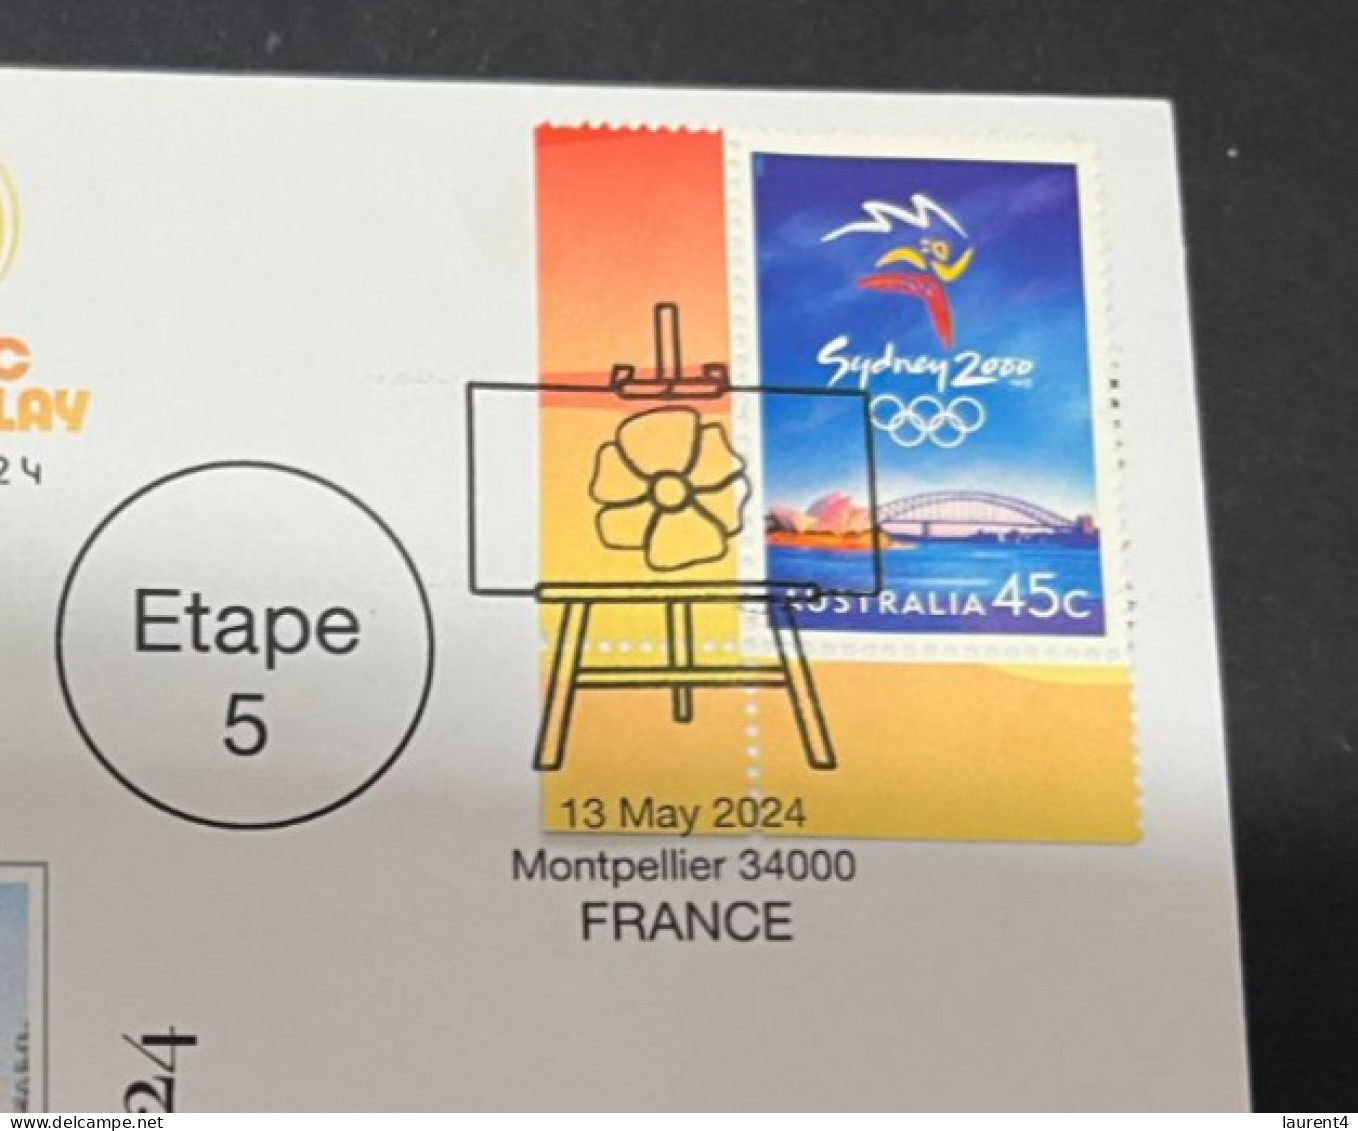 14-5-2024 (5 Z 7) Paris Olympic Games 2024 - Torch Relay (Etape 5) In Montpellier (13-5-2024) With OLYMPIC Stamp - Zomer 2024: Parijs